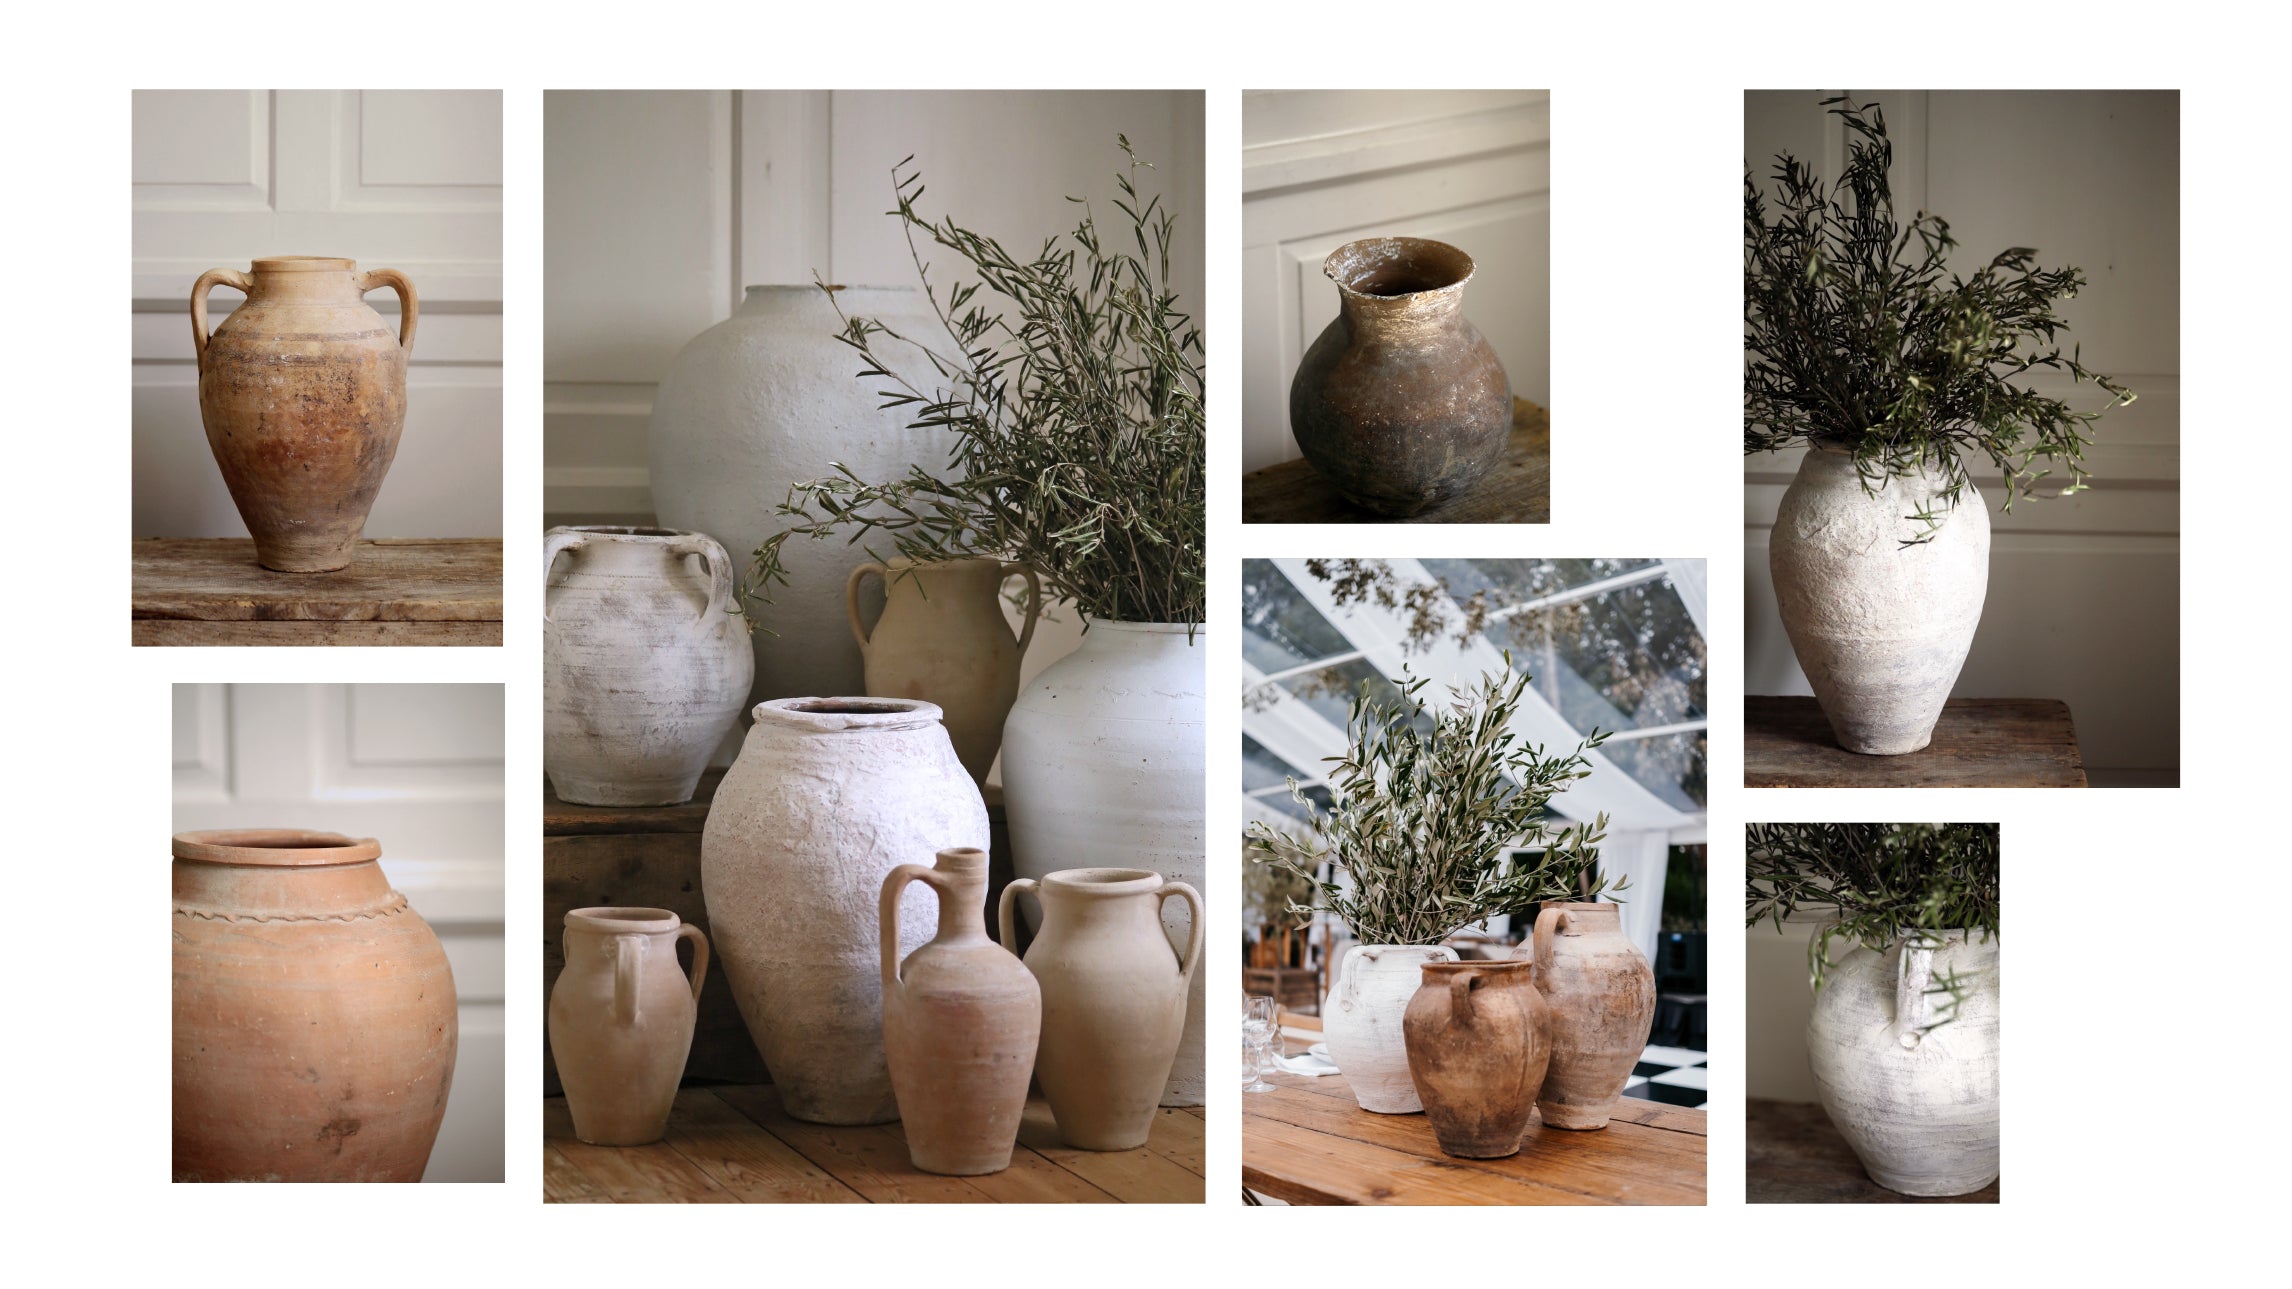 Antique terracotta + white olive pots for centrepiece vase display - hire for weddings events + photoshoot props